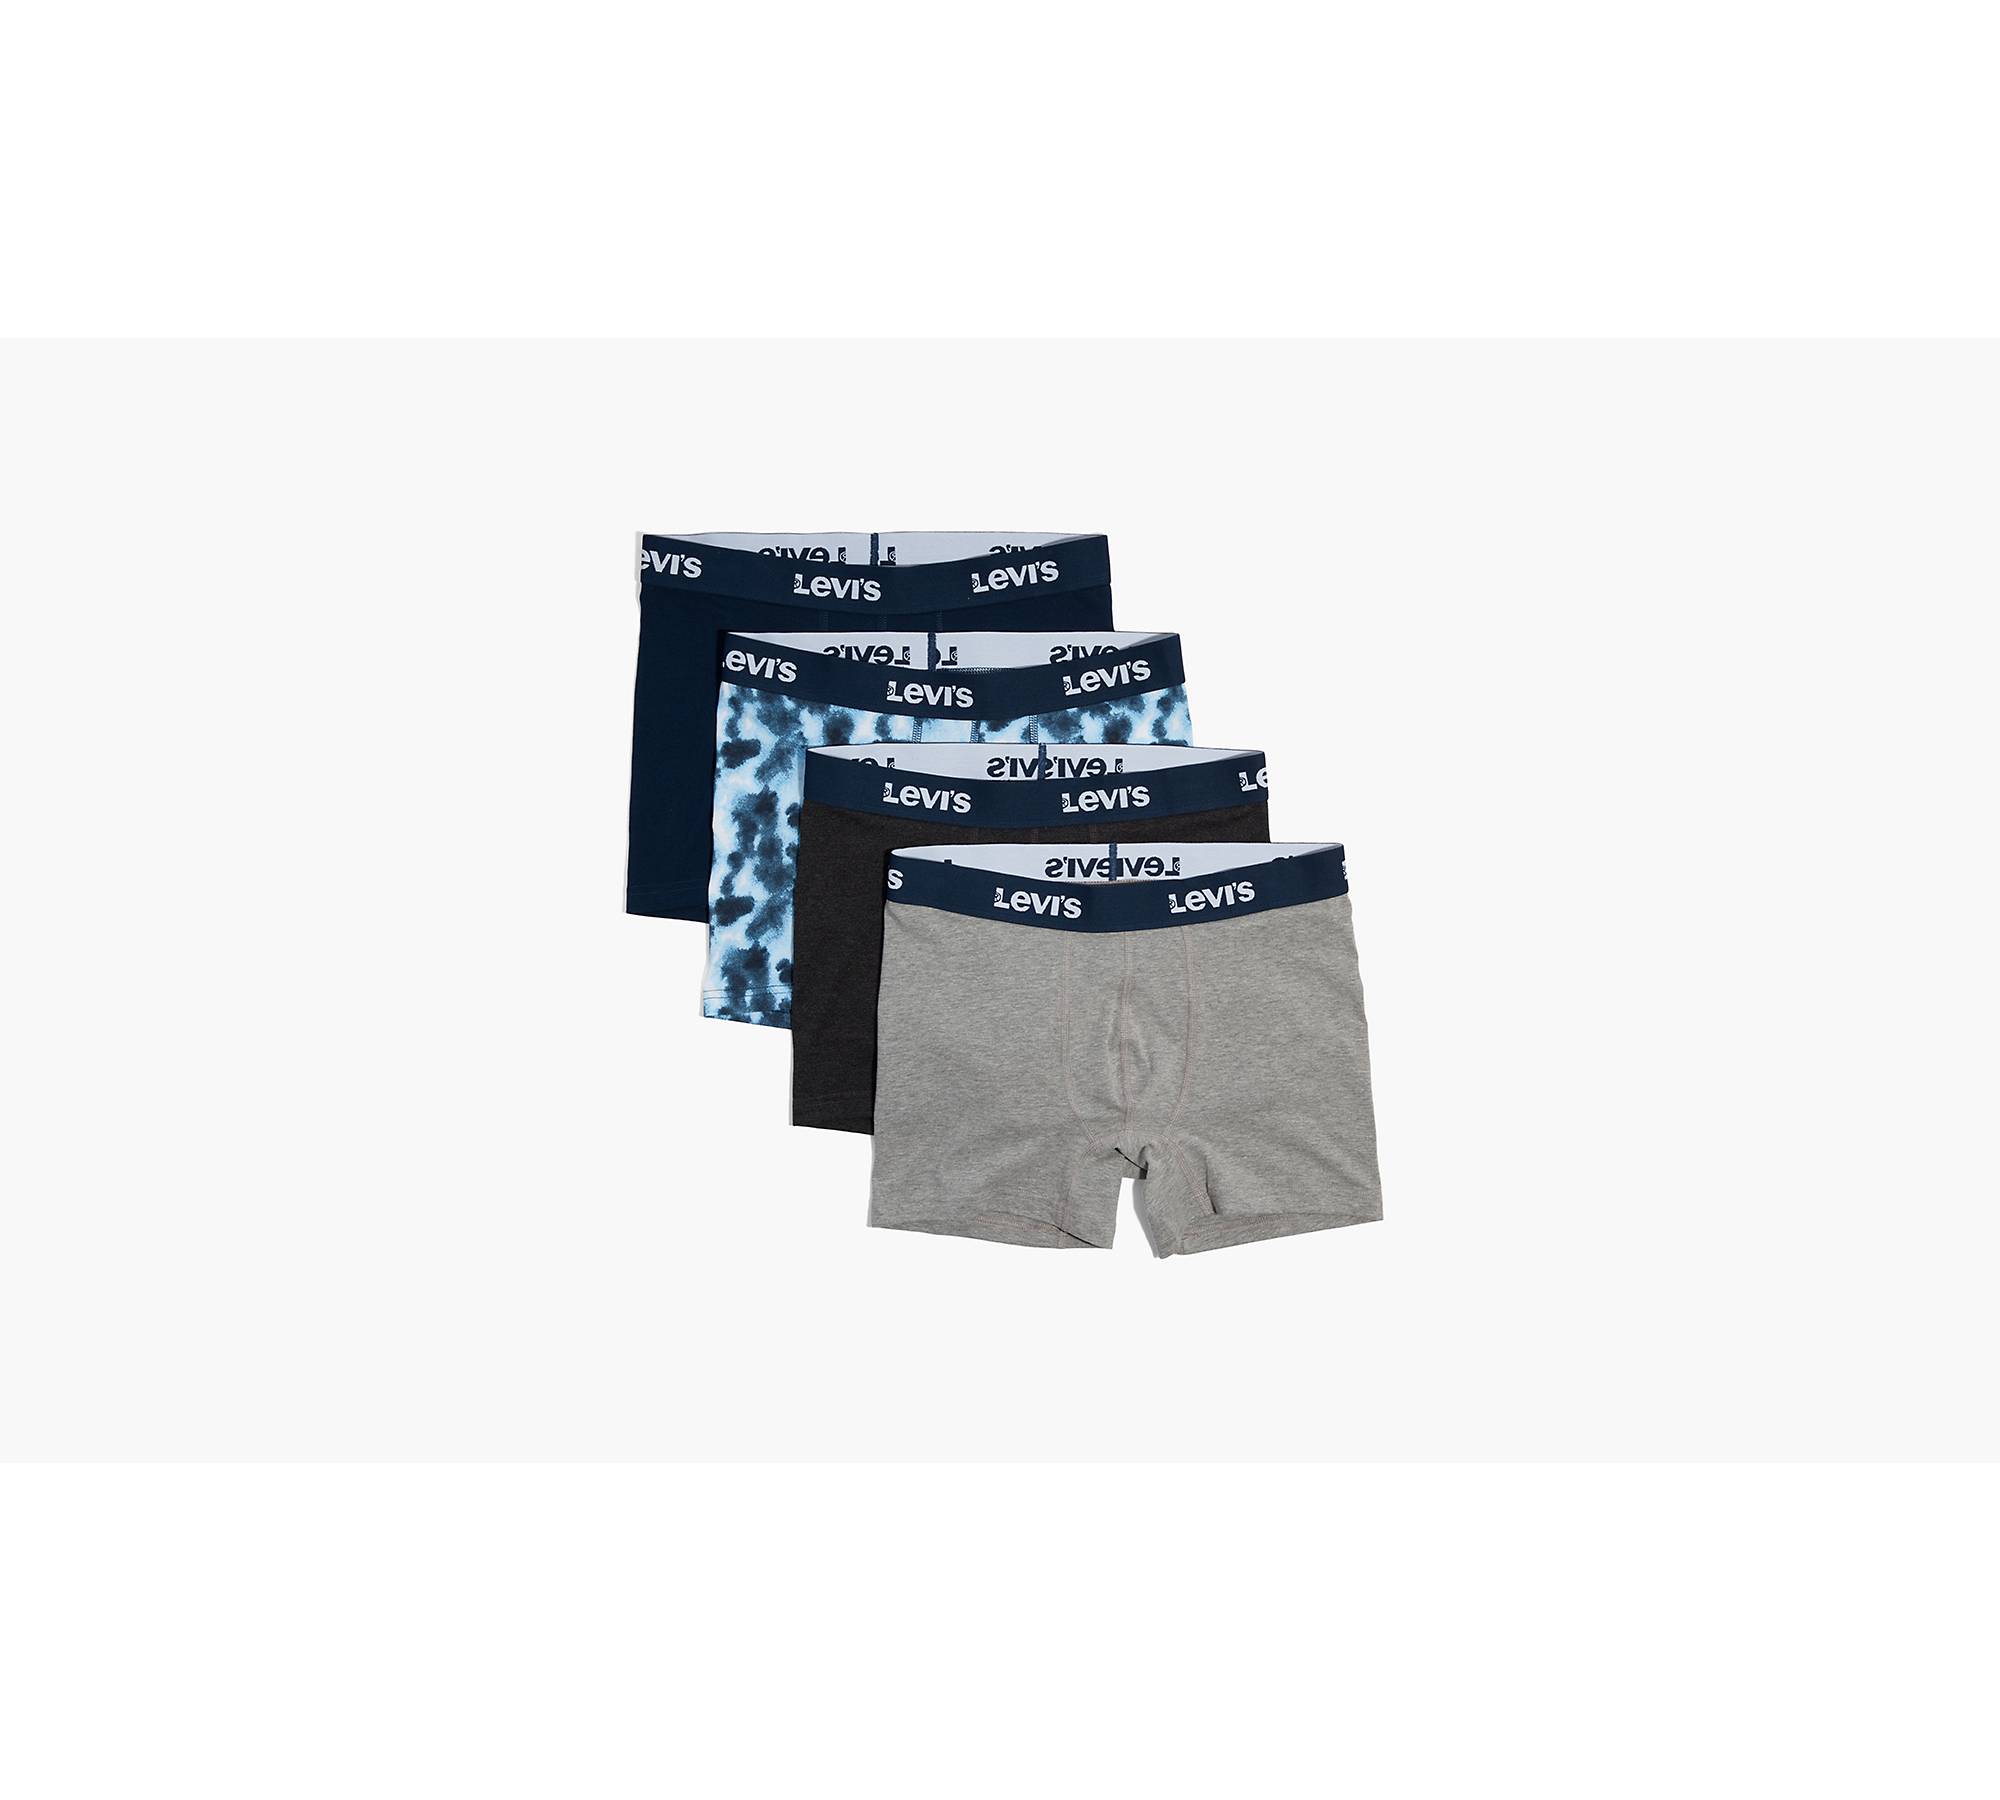 Athletic Works, Accessories, 4 Four Pairs Of Athletic Works Boys Boxer Briefs  Underwear Boxers